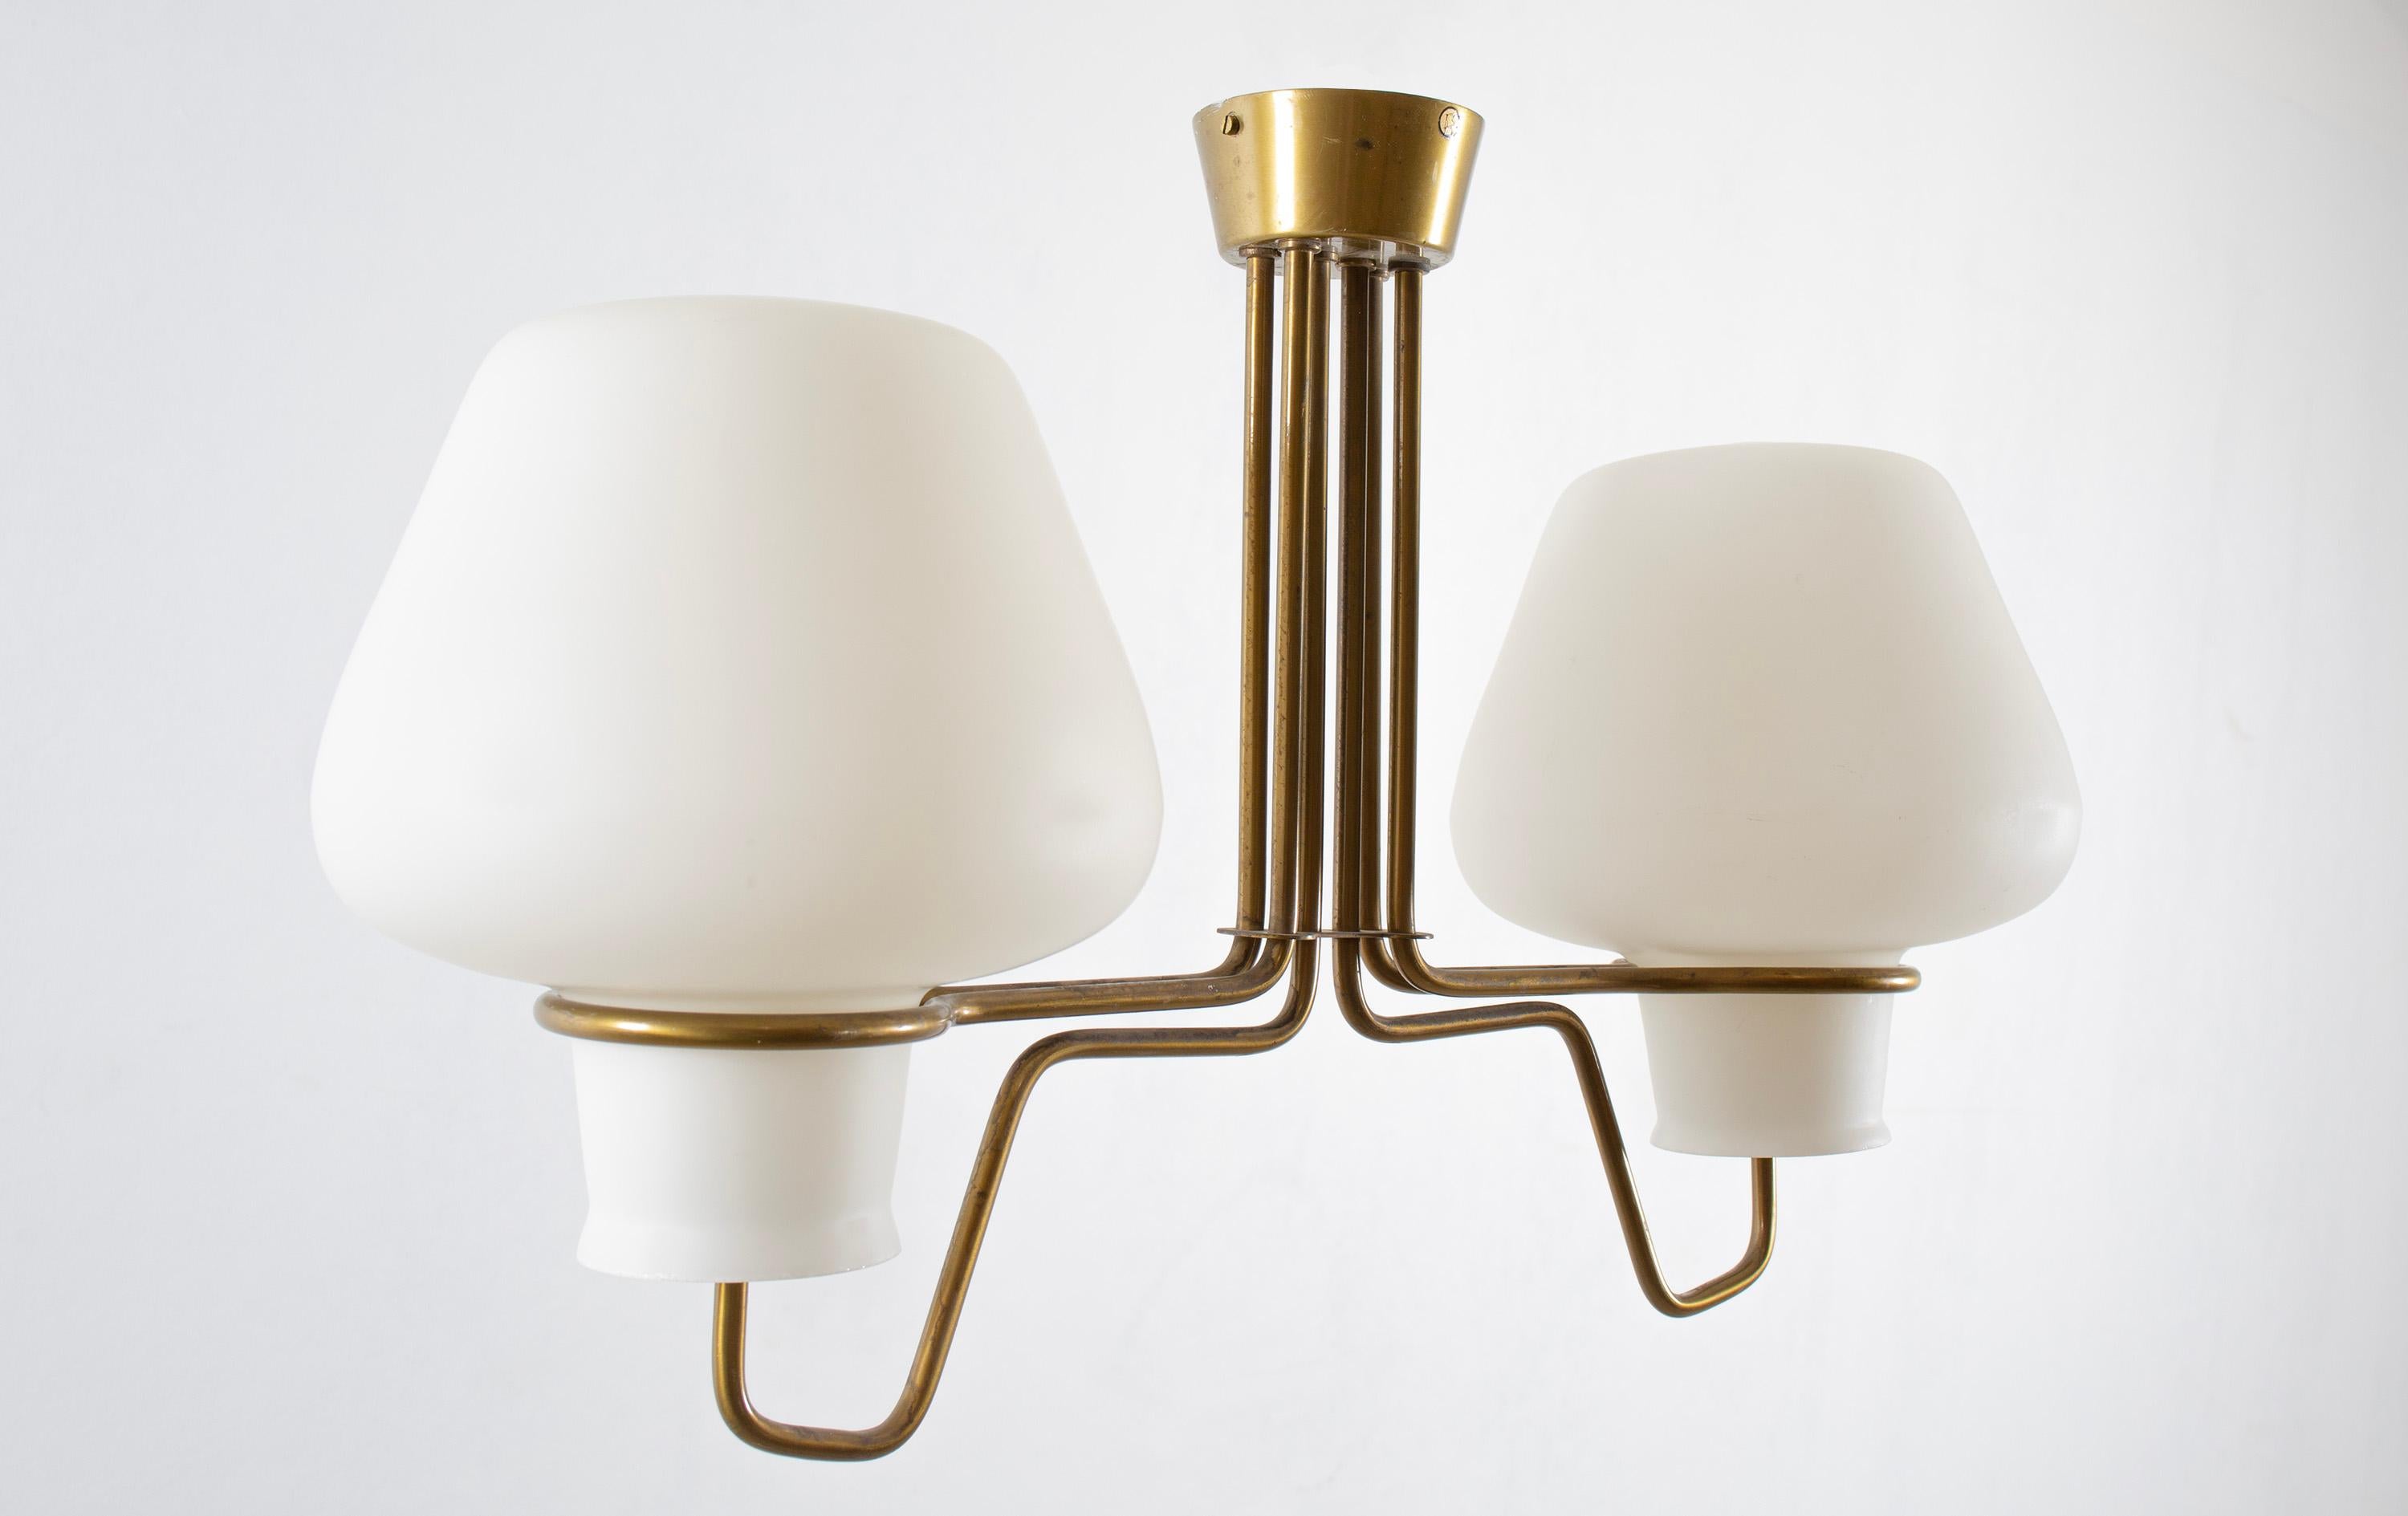 Large modernist ceiling light in brass with shades in opaline glass. Designed and made in Norway from cirka 1960s first half. The lamp is fully working and in good vintage condition. It is fitted with two E27 bulb holders (works in the US), with a